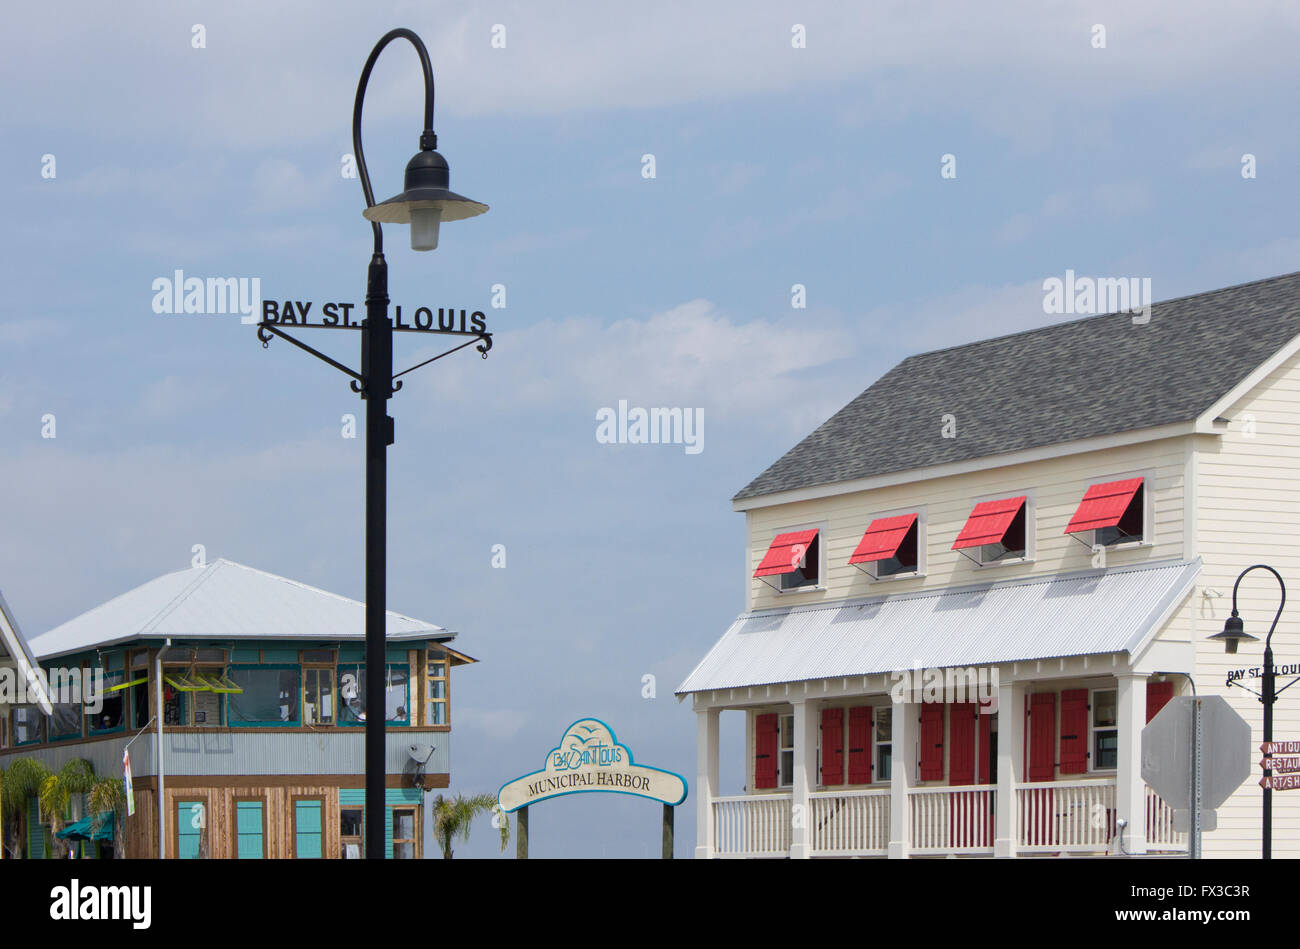 New bars & restaurants in Bay St. Lois, MS, a town previously destroyed by hurricane Katrina. Stock Photo